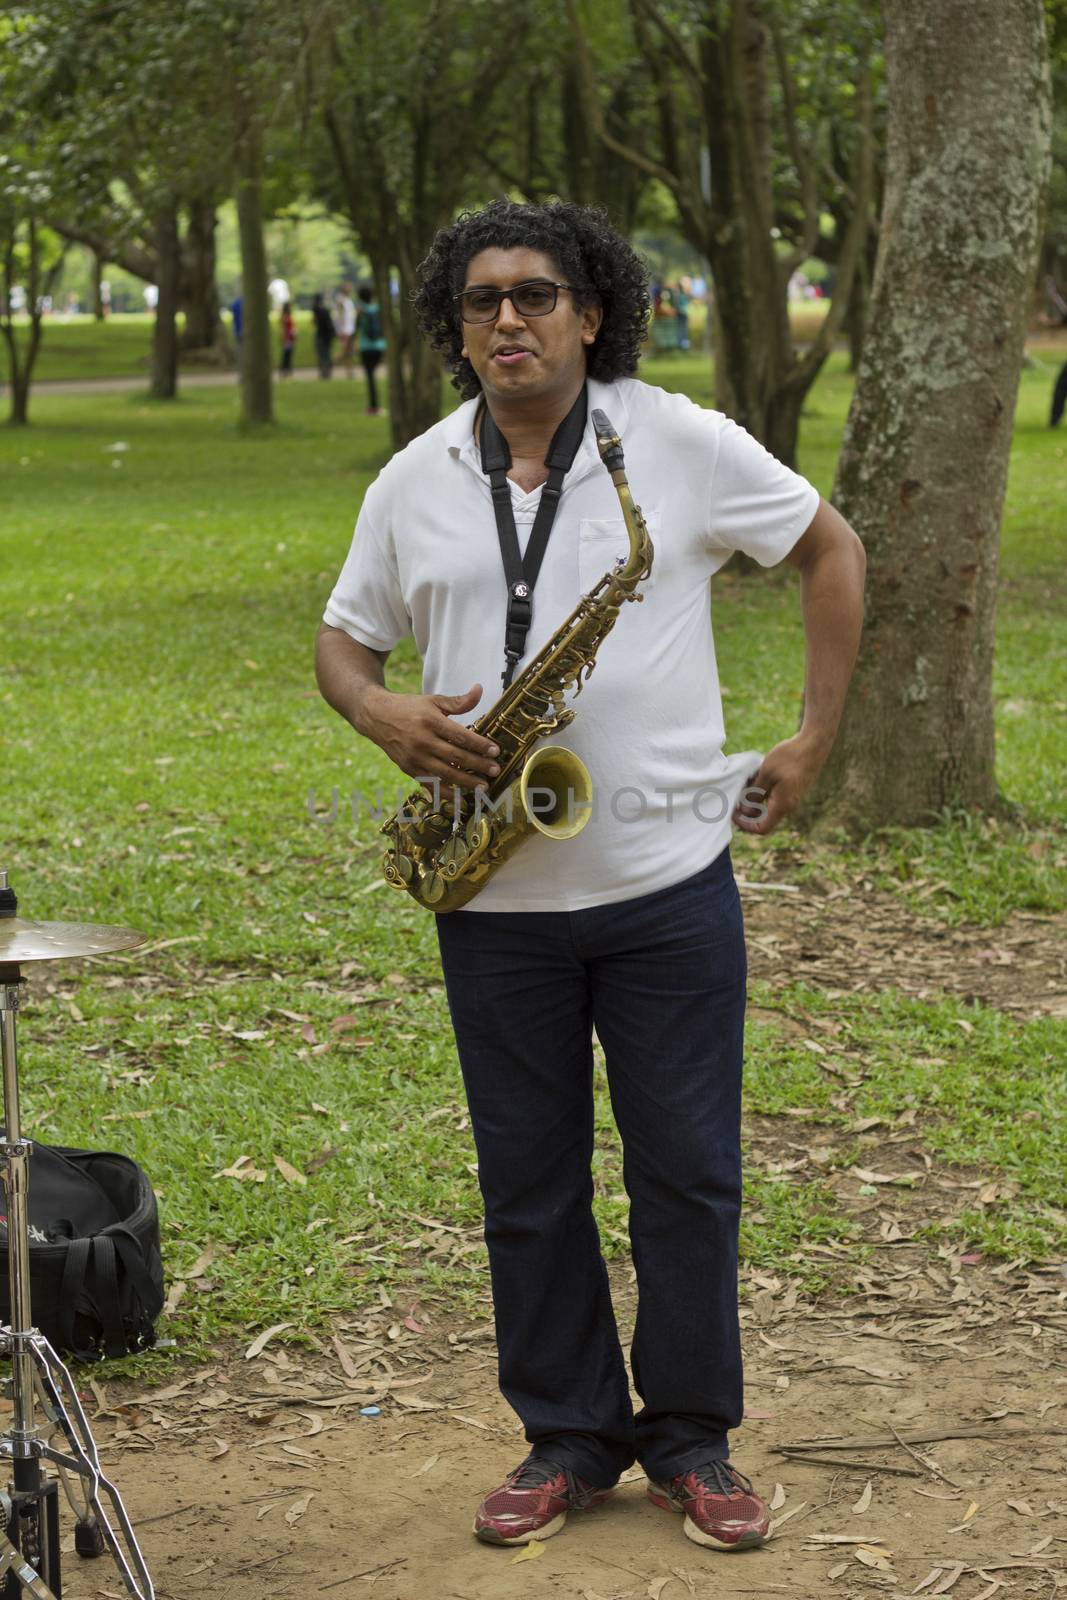 SAO PAULO, BRAZIL - FEBRUARY 01, 2015: An unidentified street musician playing saxophone in the Ibirapuera Park at Sao Paulo Brazil.